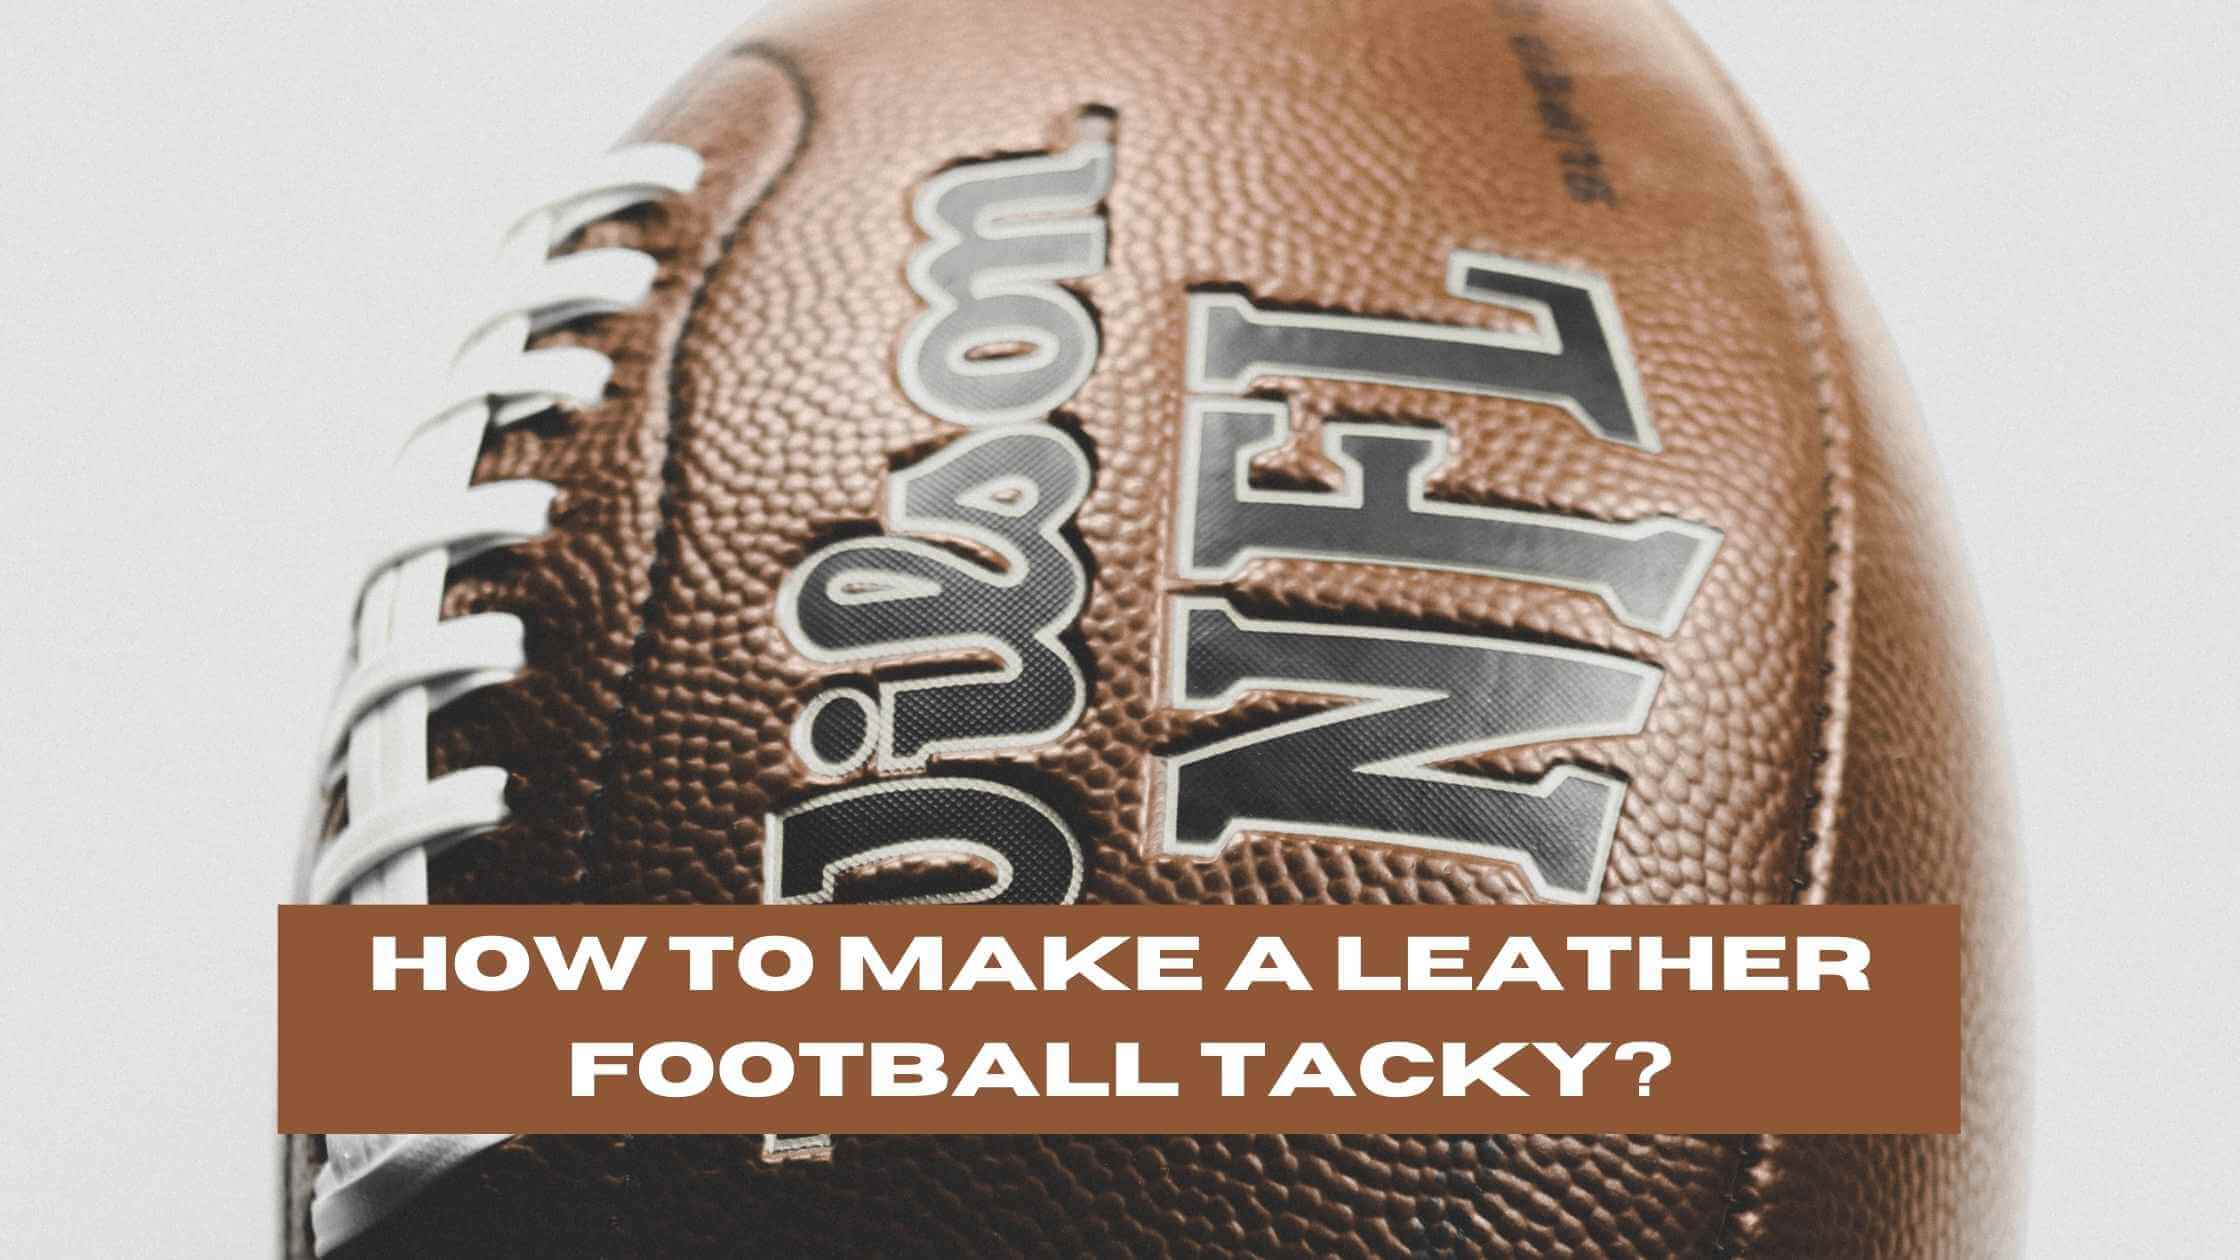 How to Make a Leather Football Tacky